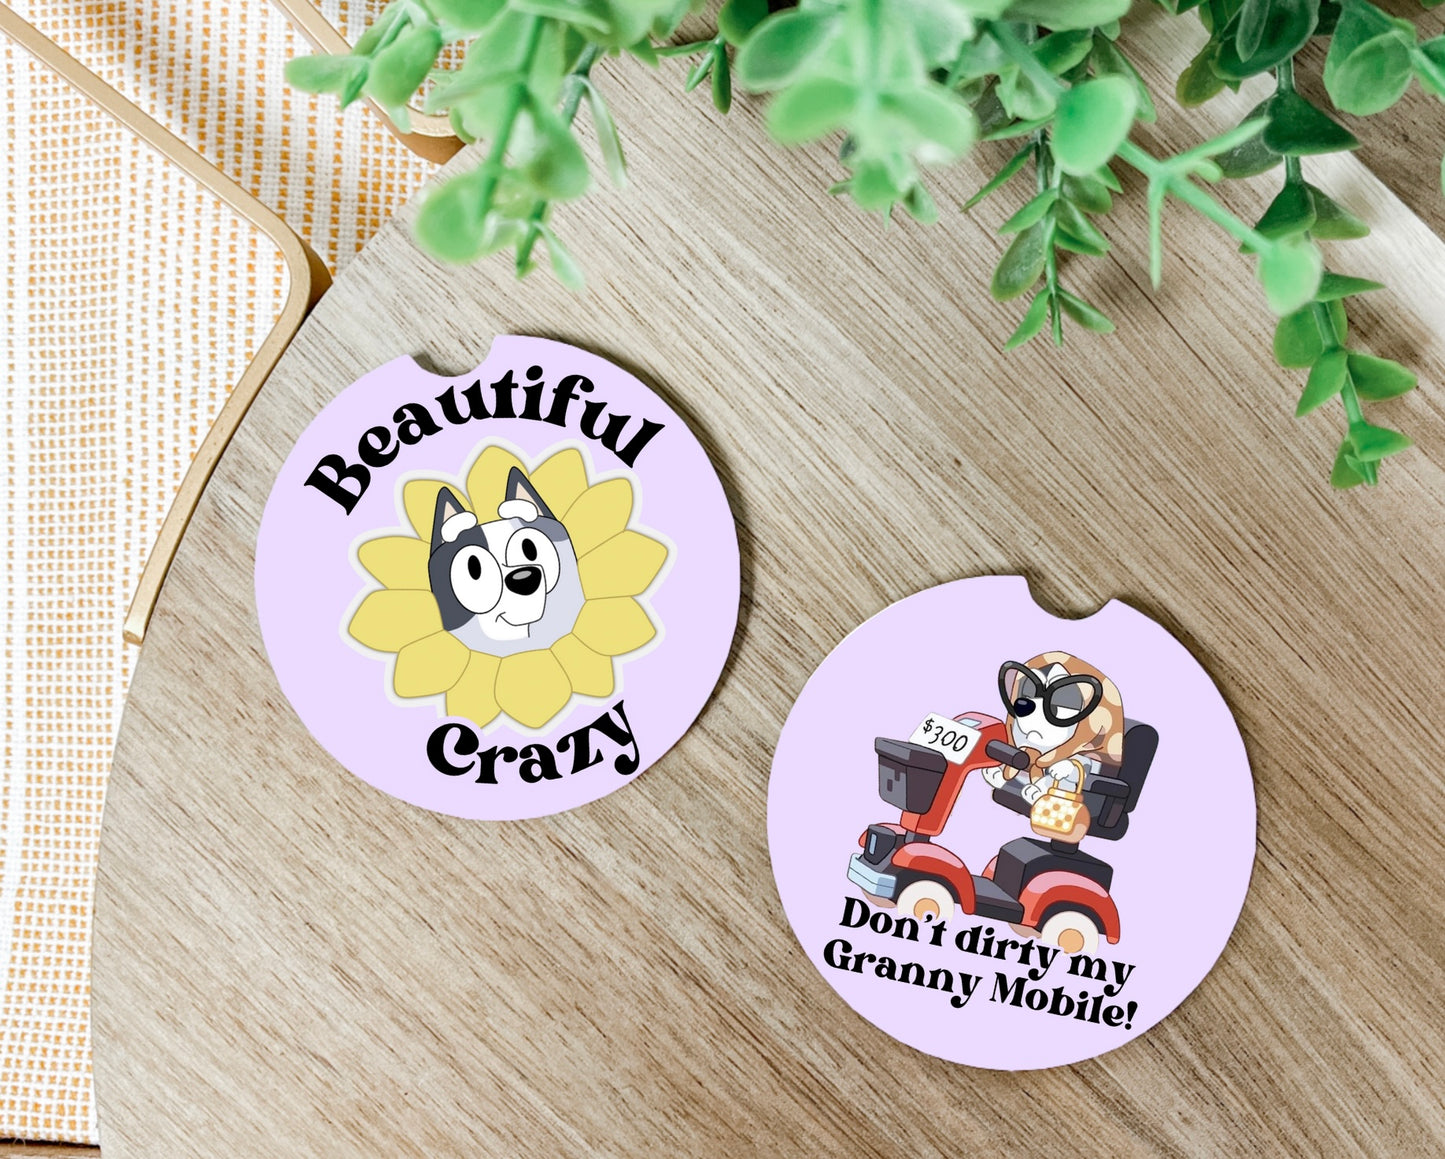 Muffin Dirty Granny Mobile Coaster Set